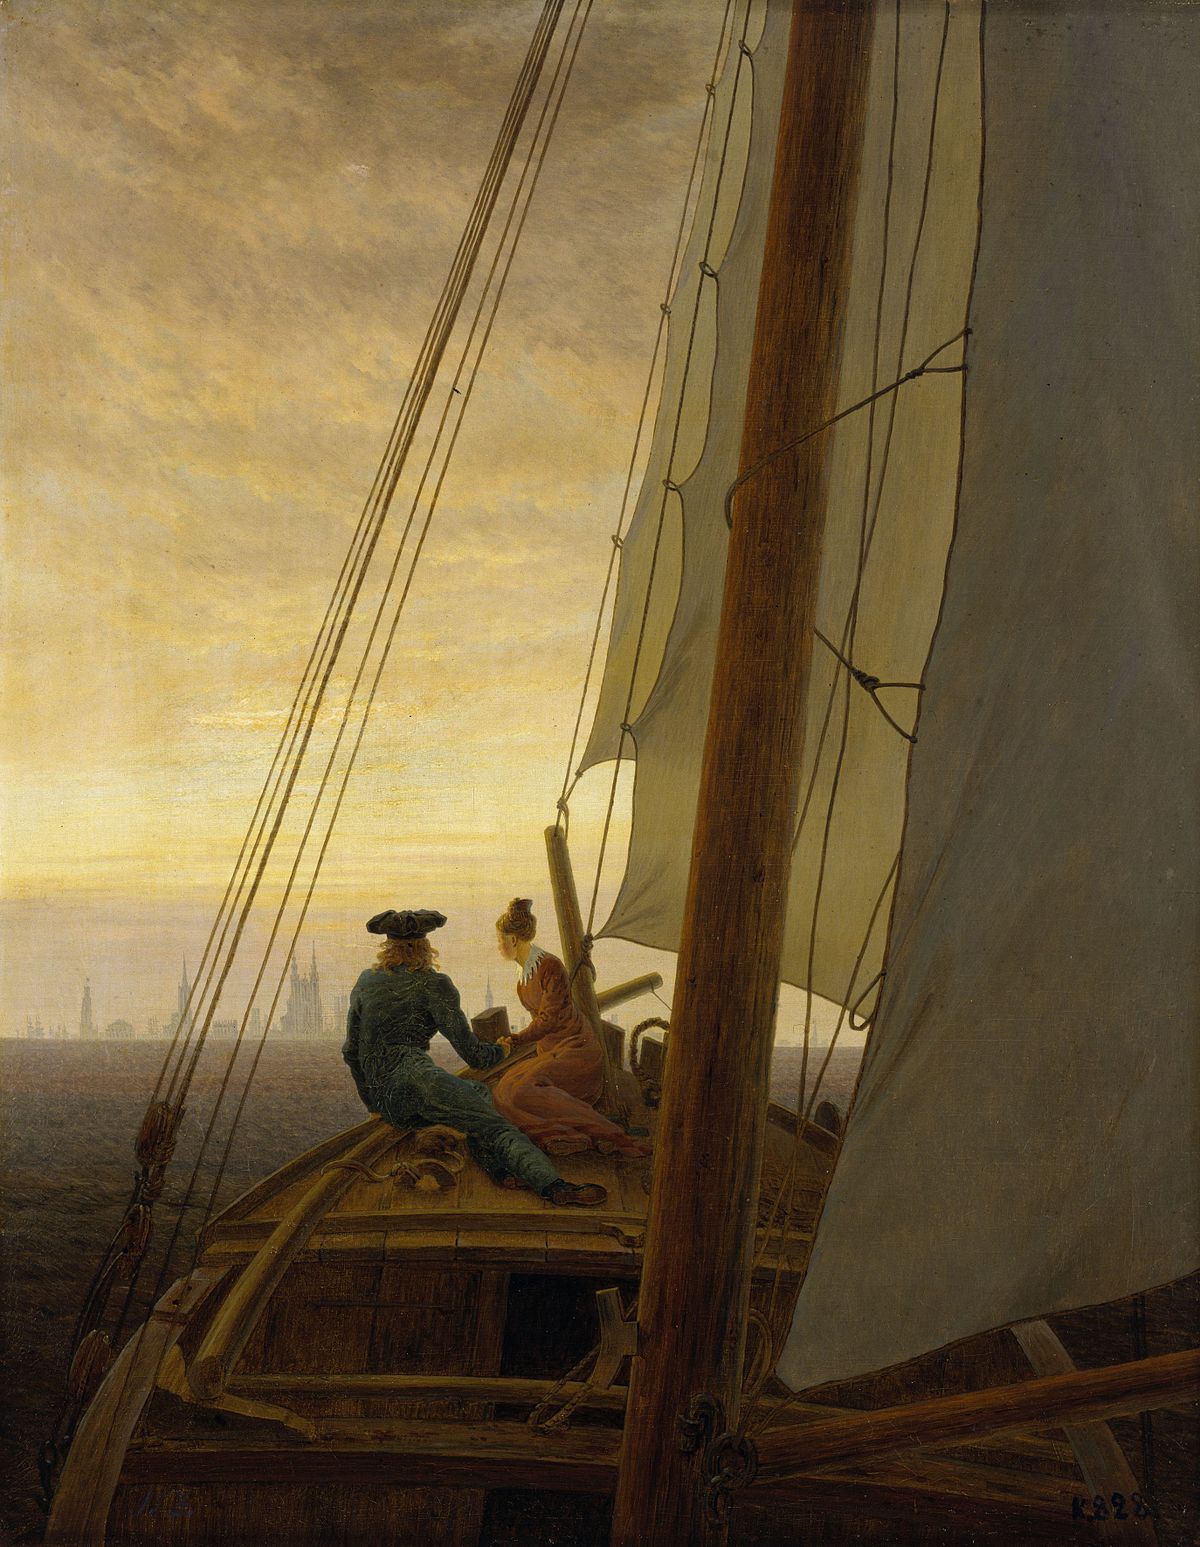 Sailing in Painting: Caspar David Friedrich, On Board of a Sailing Ship, 1820, Hermitage Museum, Saint Petersburg, Russia.